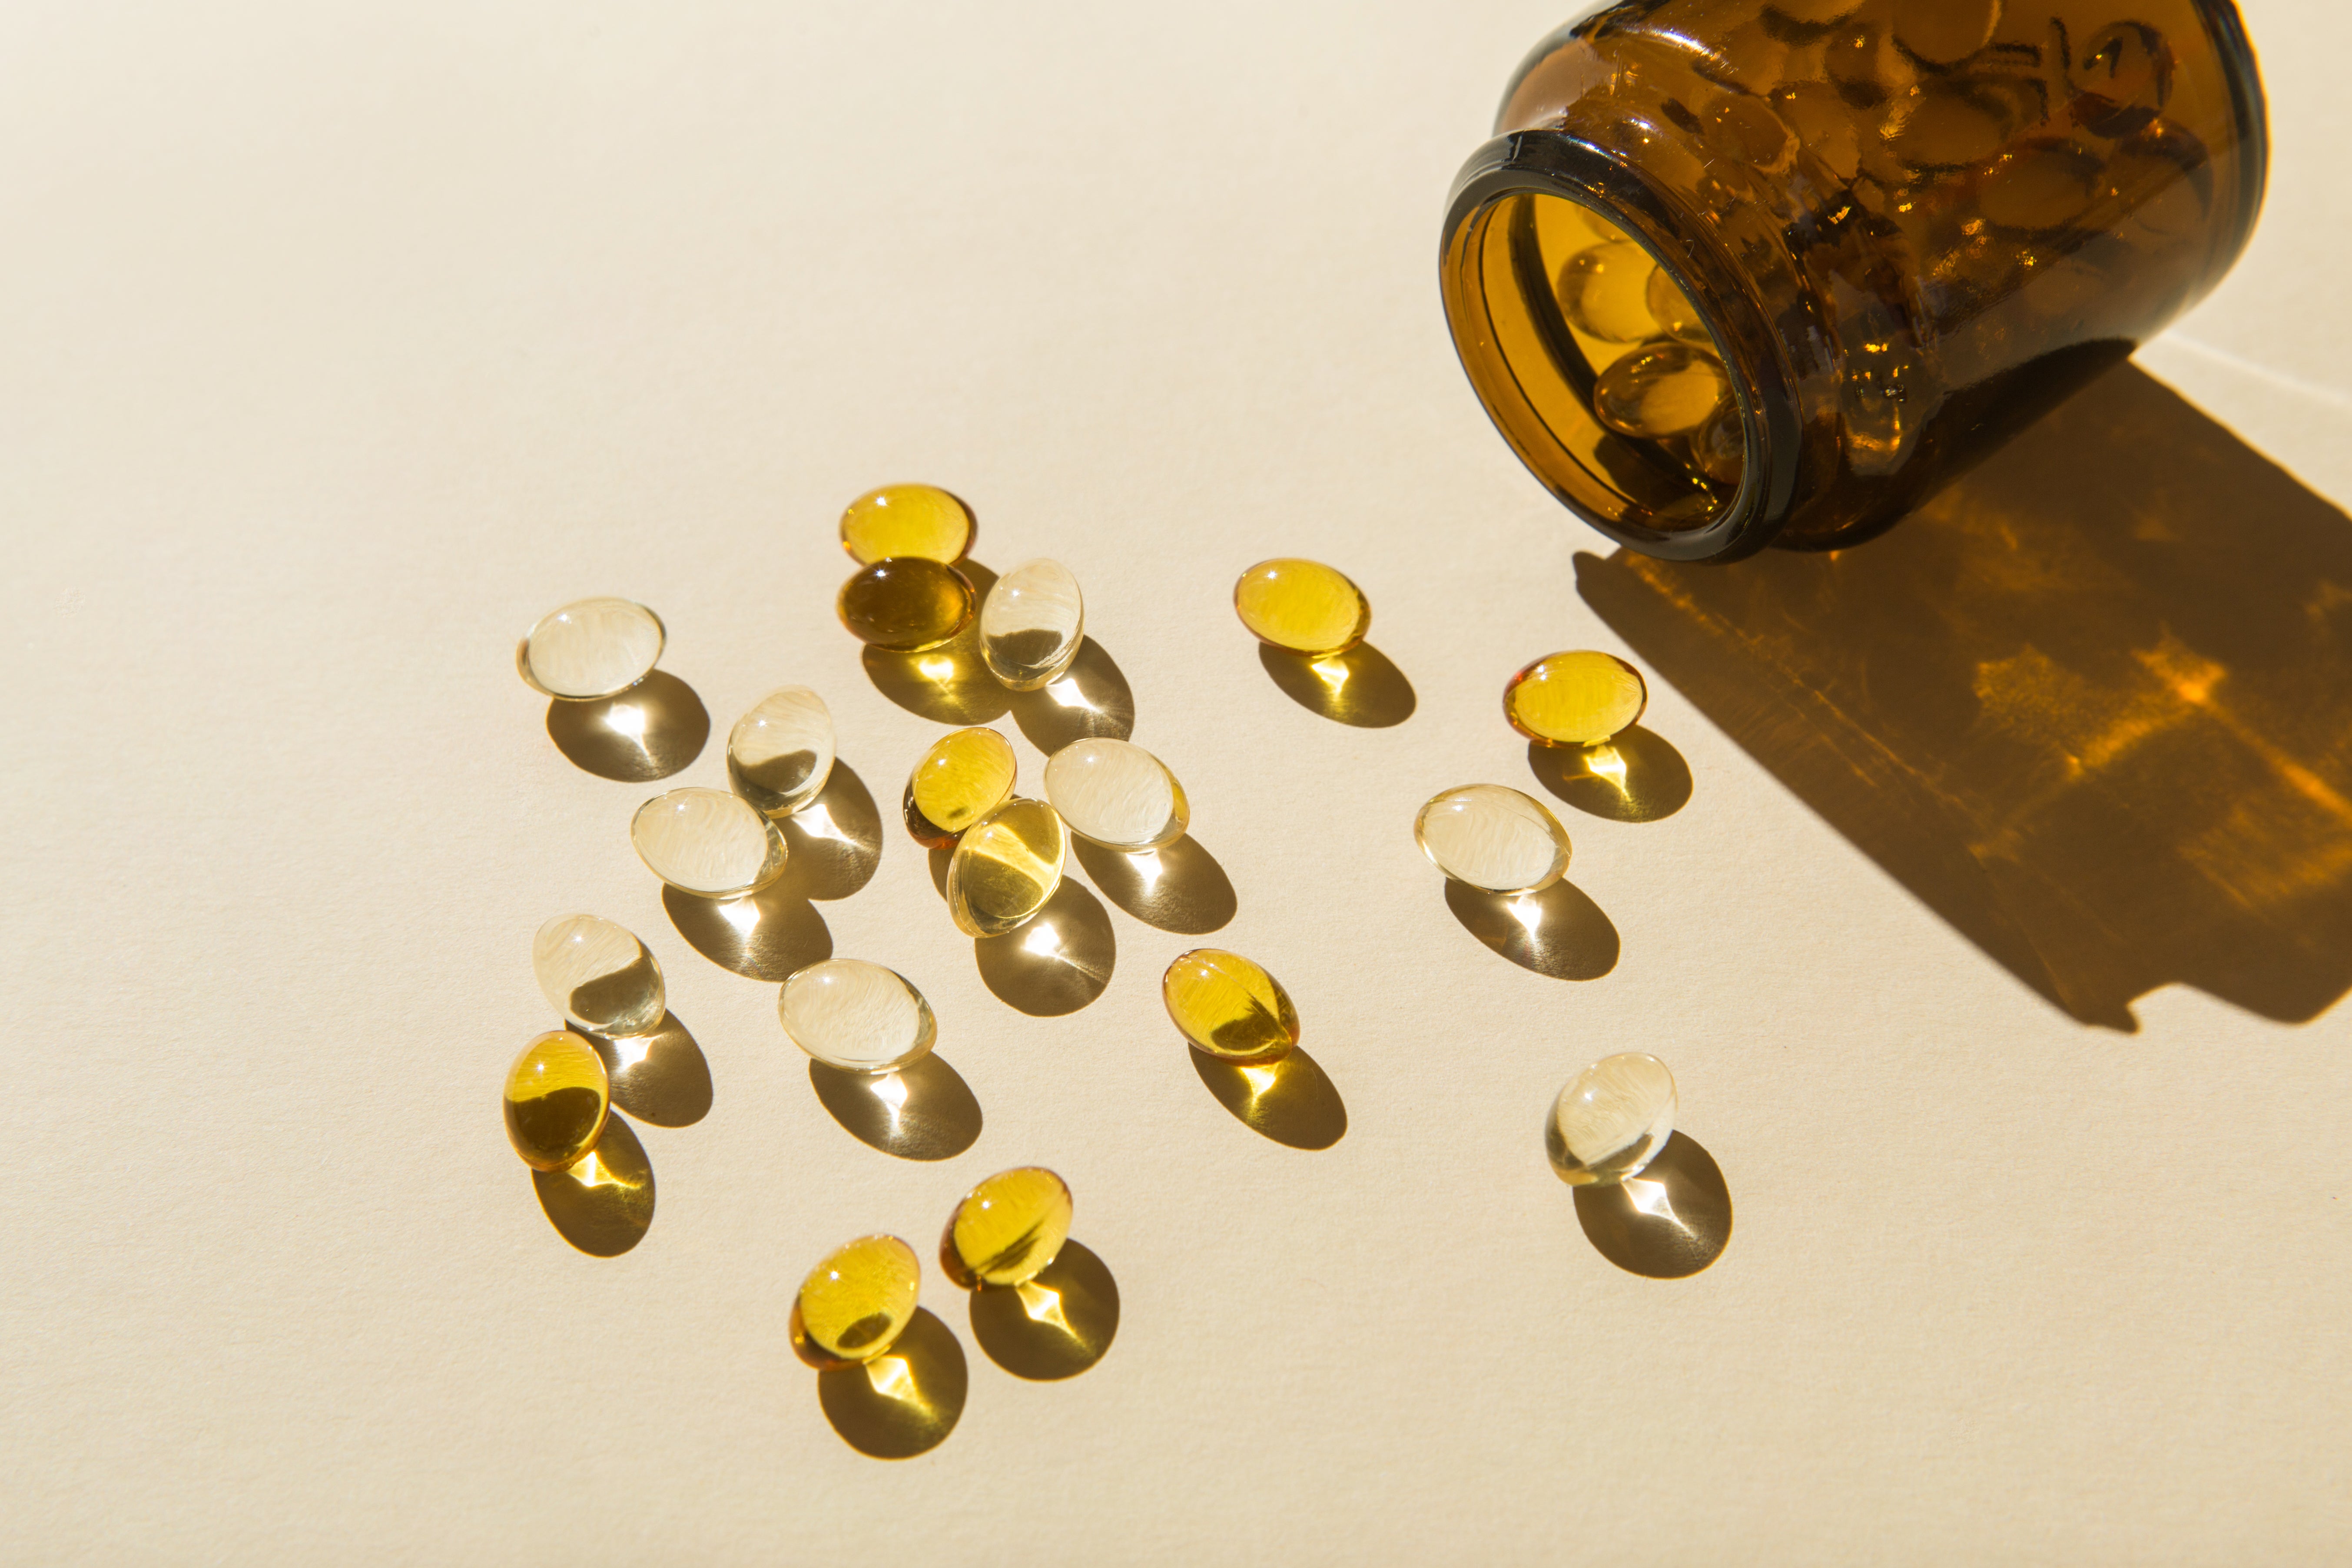 Vitamin D Supplements Probably Won't Prevent Mental Illness After All